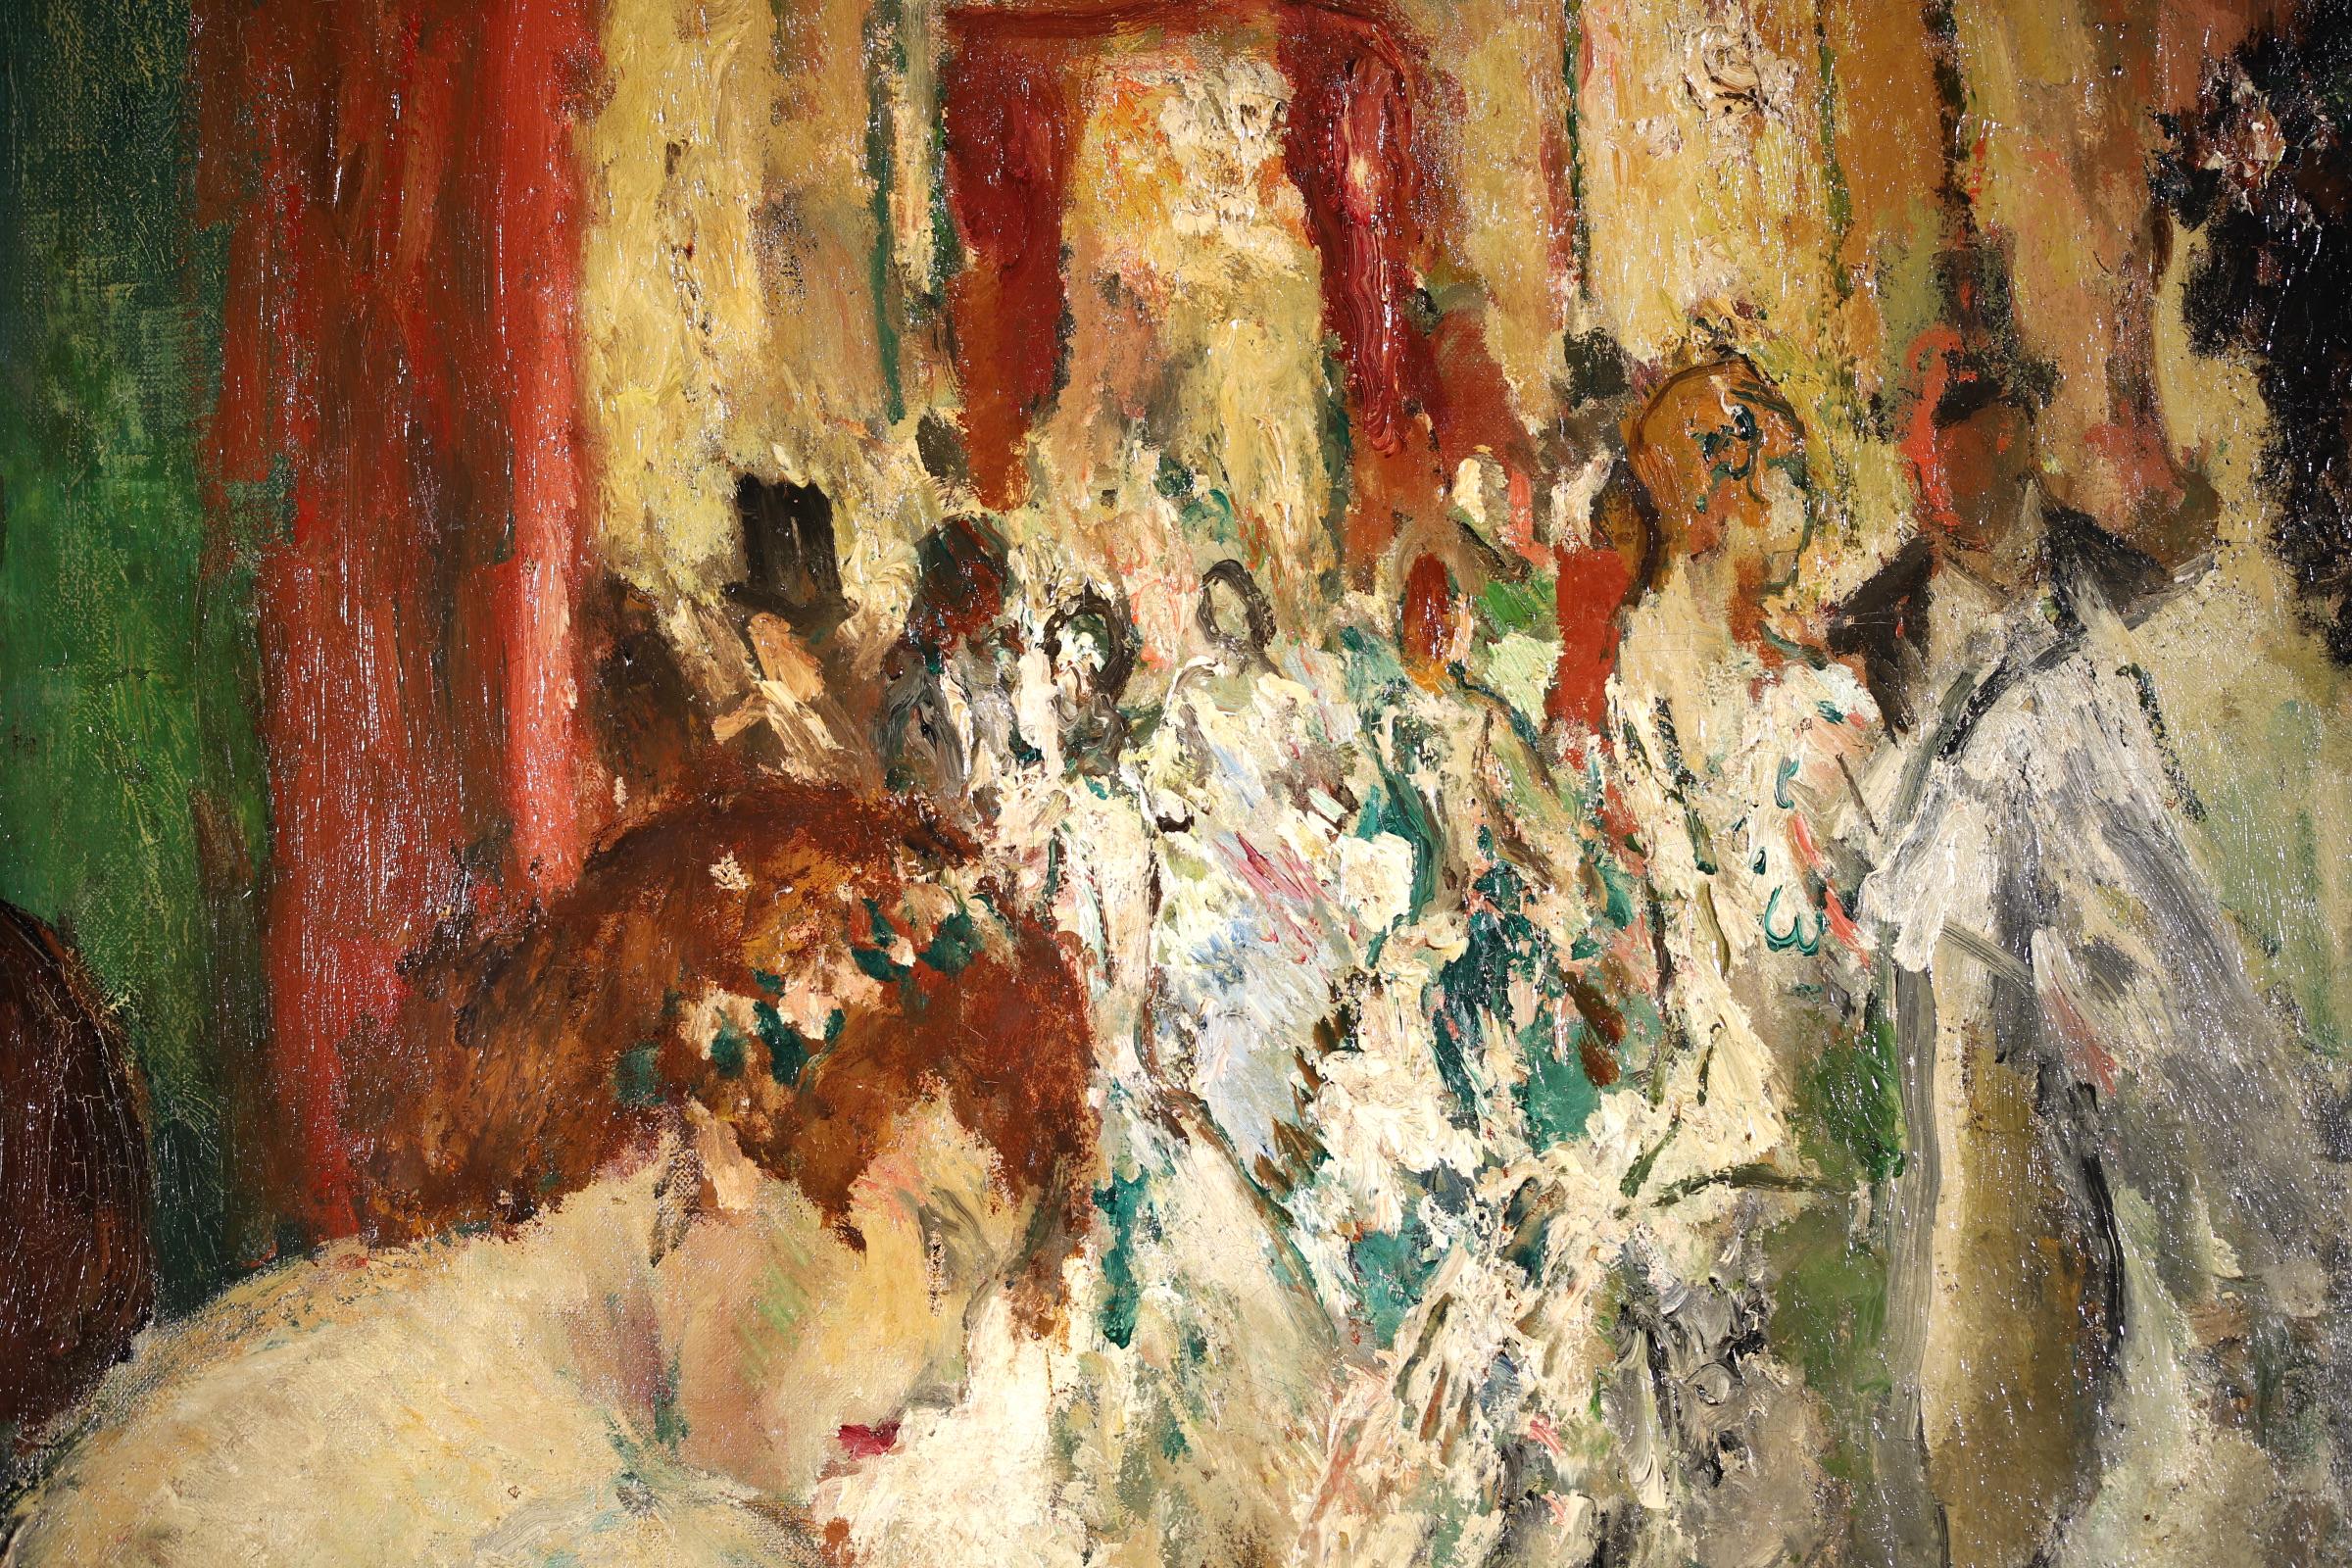 Dancer's Lodge - Post Impressionist Oil, Figures in Interior by Marcel Cosson - Post-Impressionist Painting by Jean-Louis-Marcel Cosson